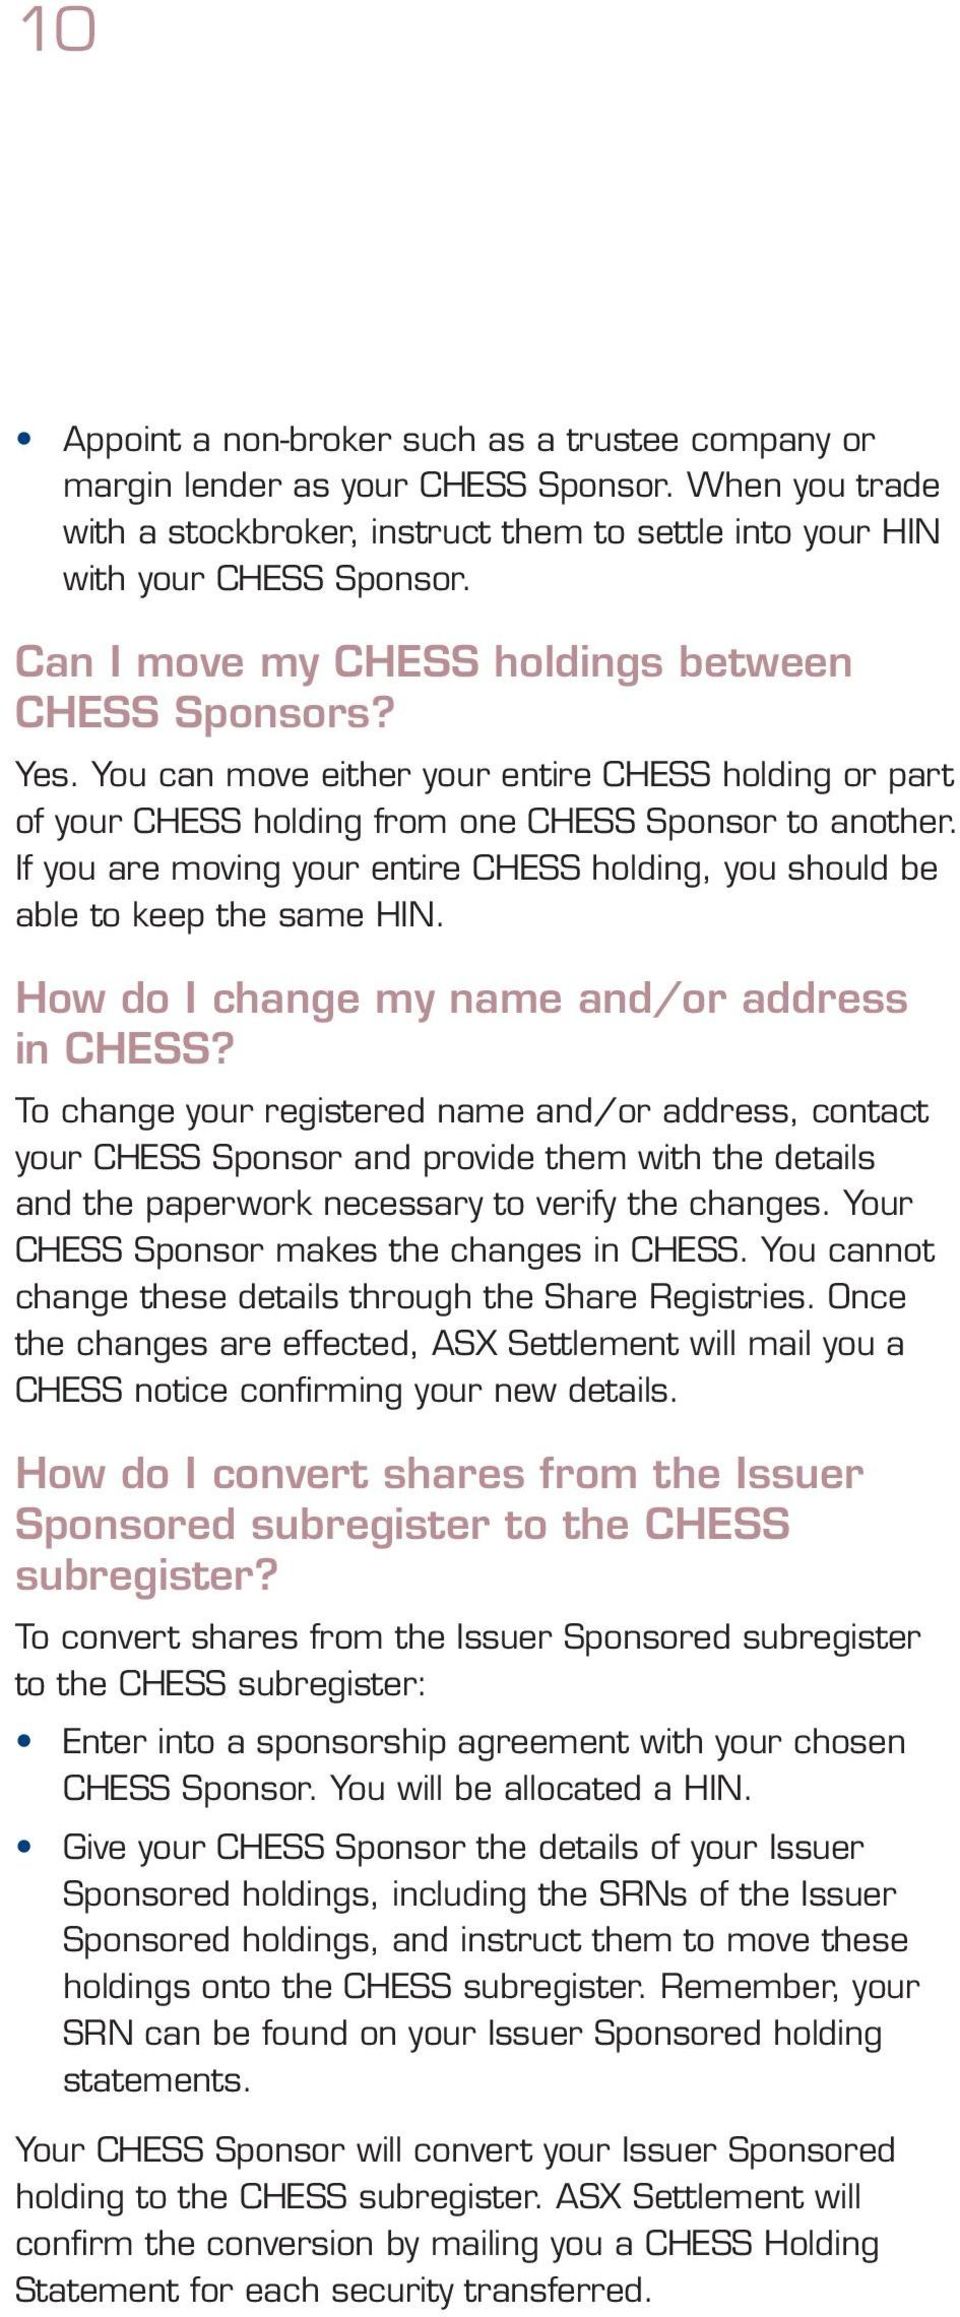 If you are moving your entire CHESS holding, you should be able to keep the same HIN. How do I change my name and/or address in CHESS?